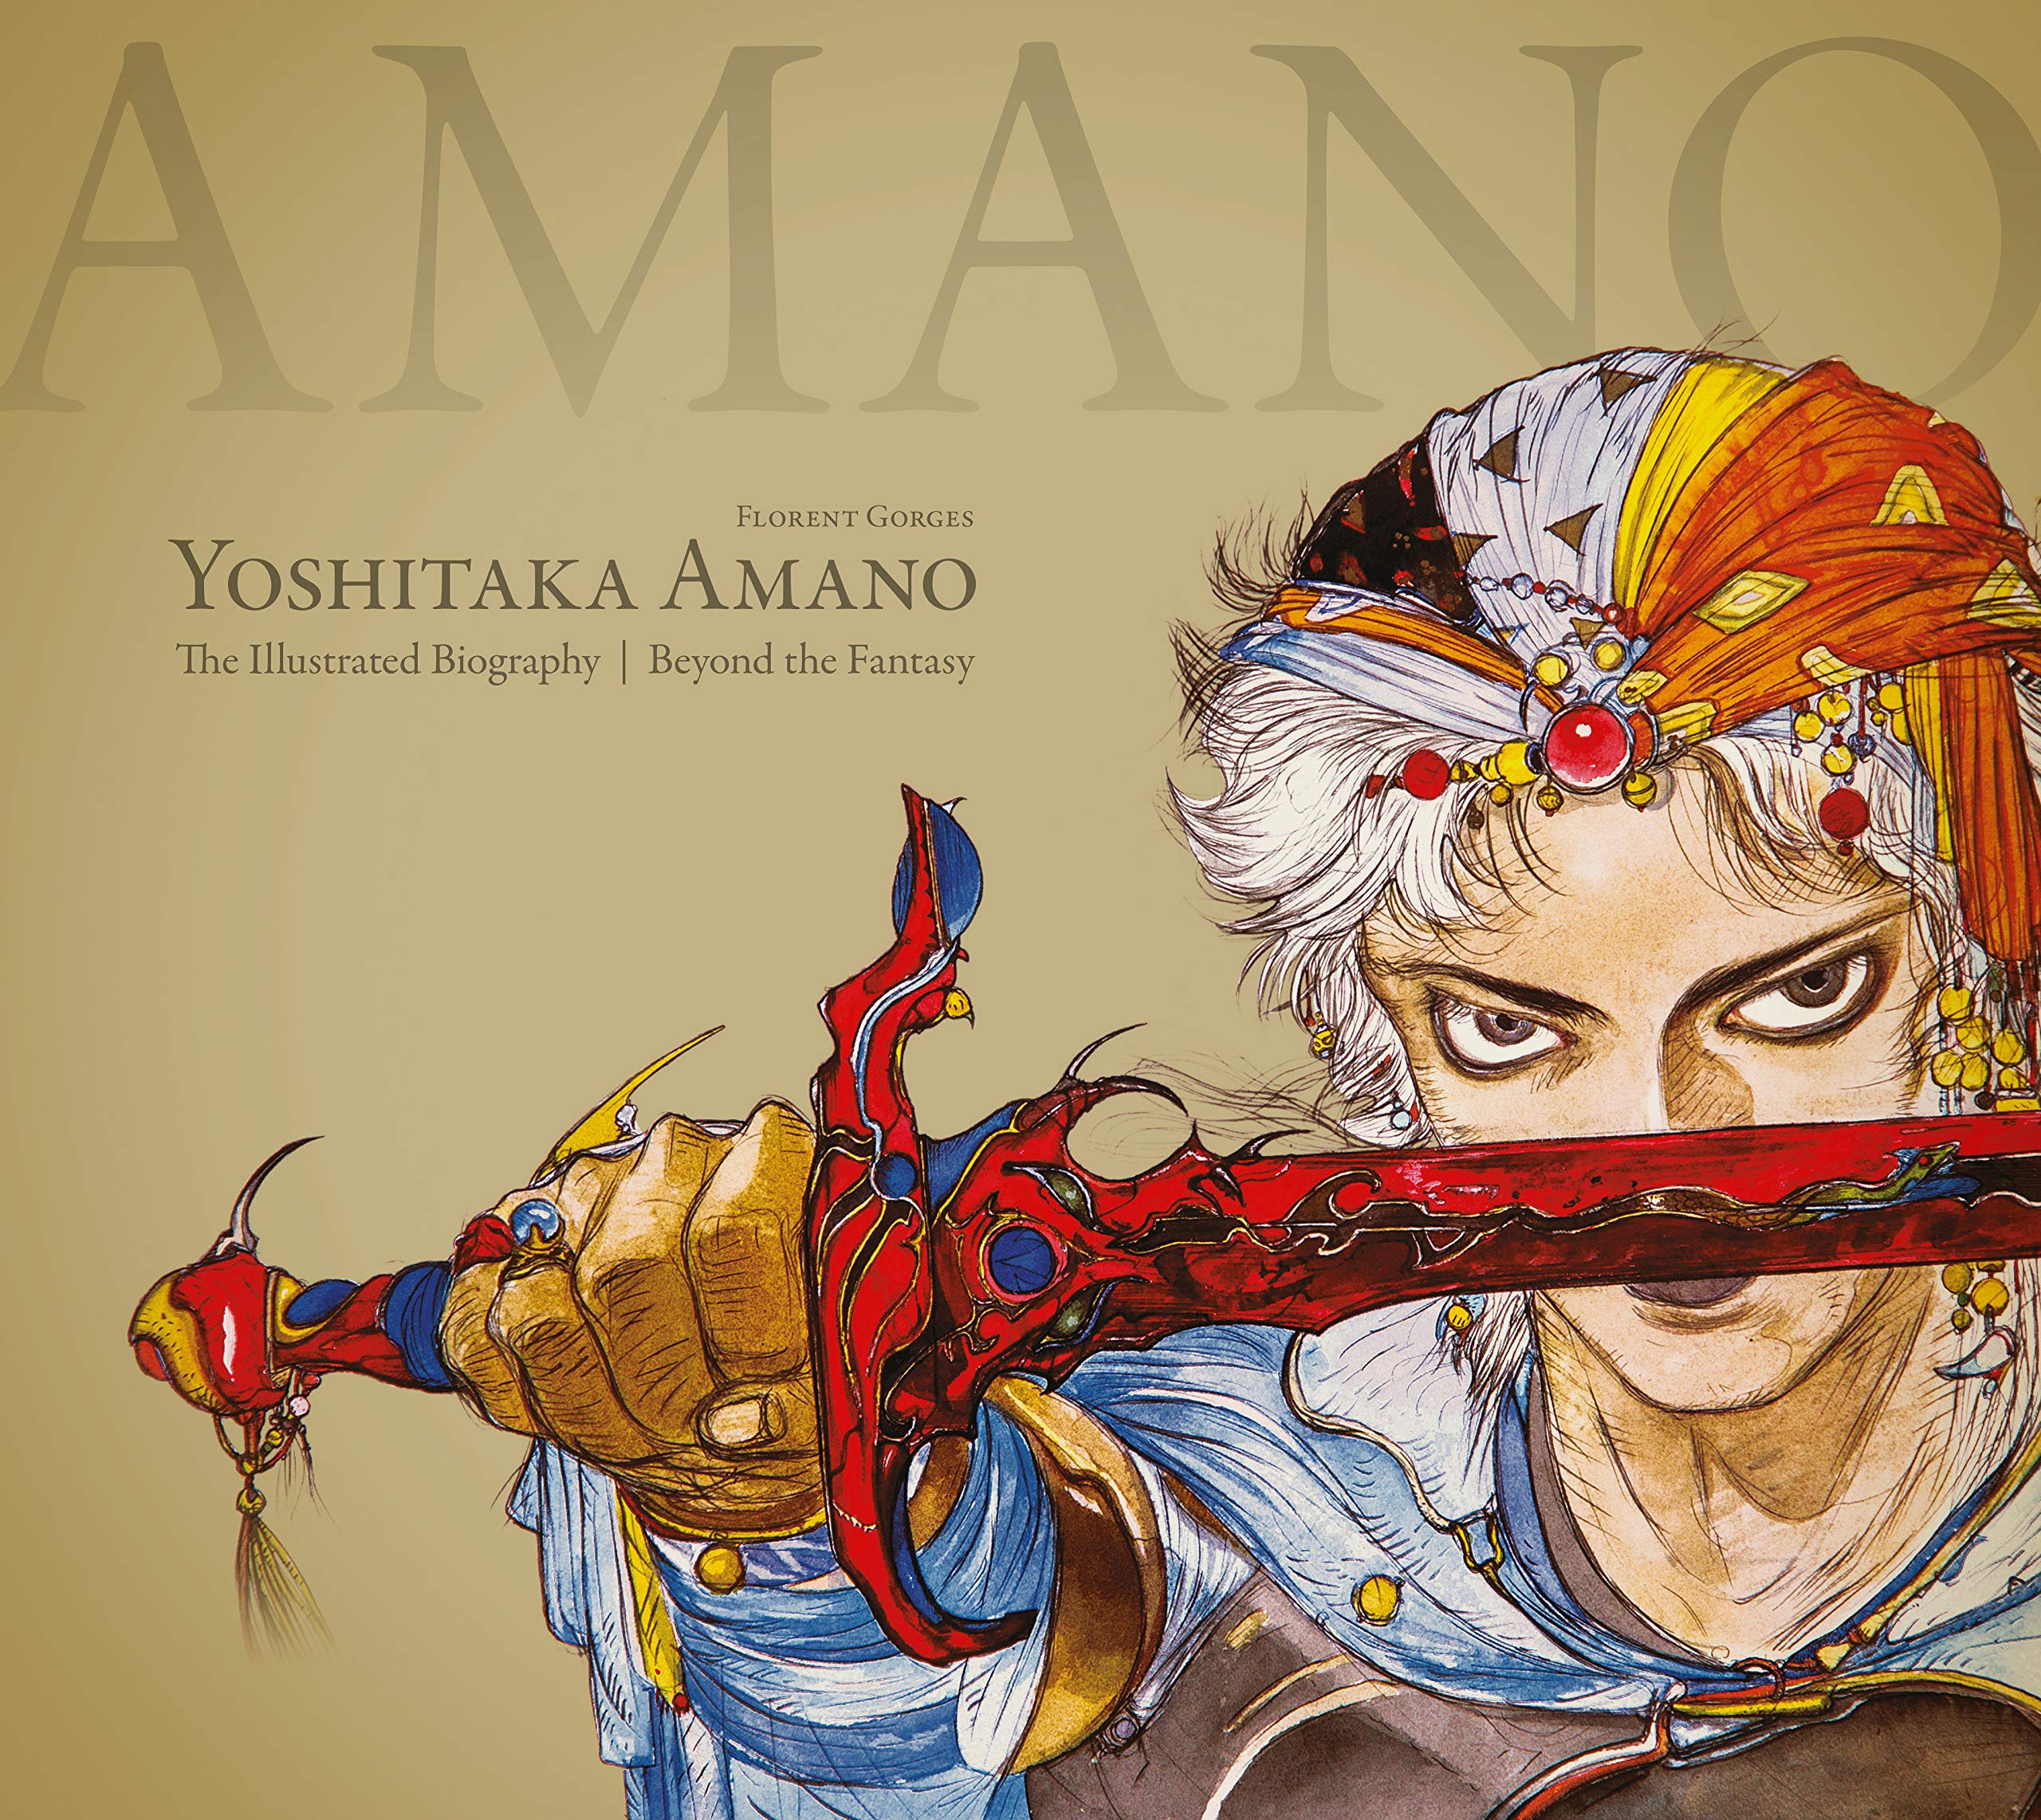 Image for The beautiful illustrated biography of Yoshitaka Amano is a must-have for Final Fantasy fans